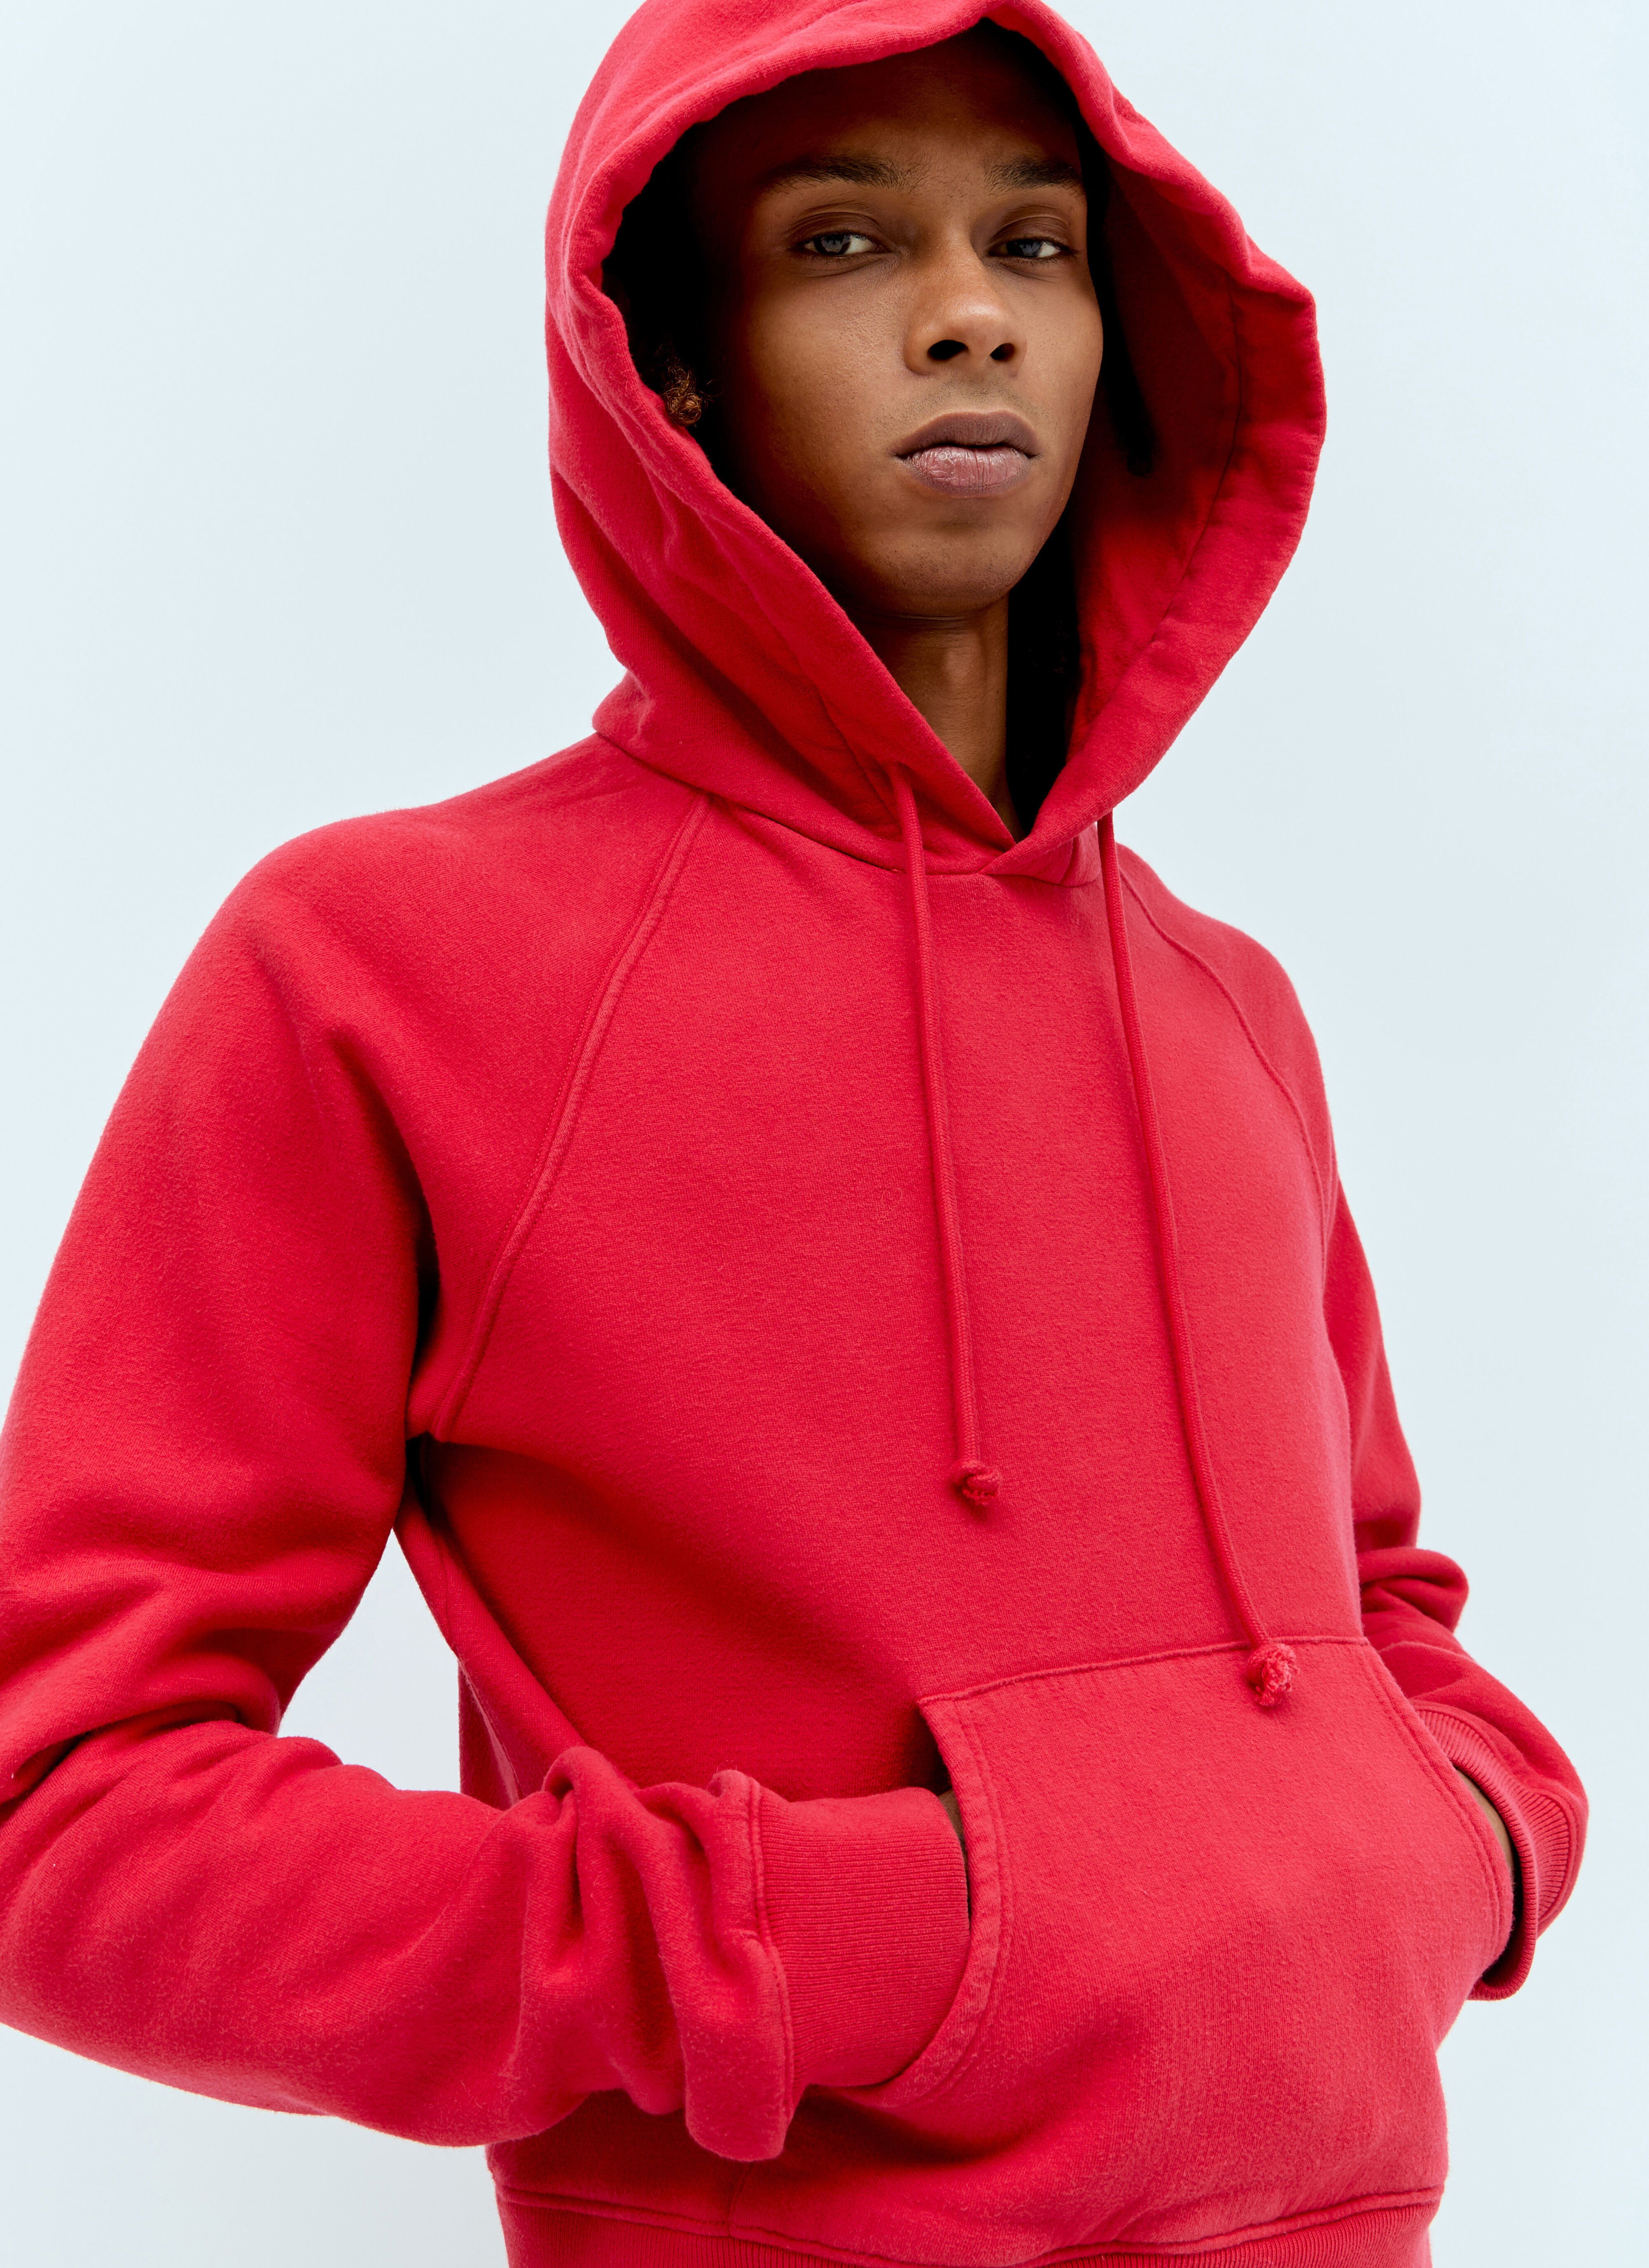 The Row Frances Cropped Sweatshirt Red row0156010